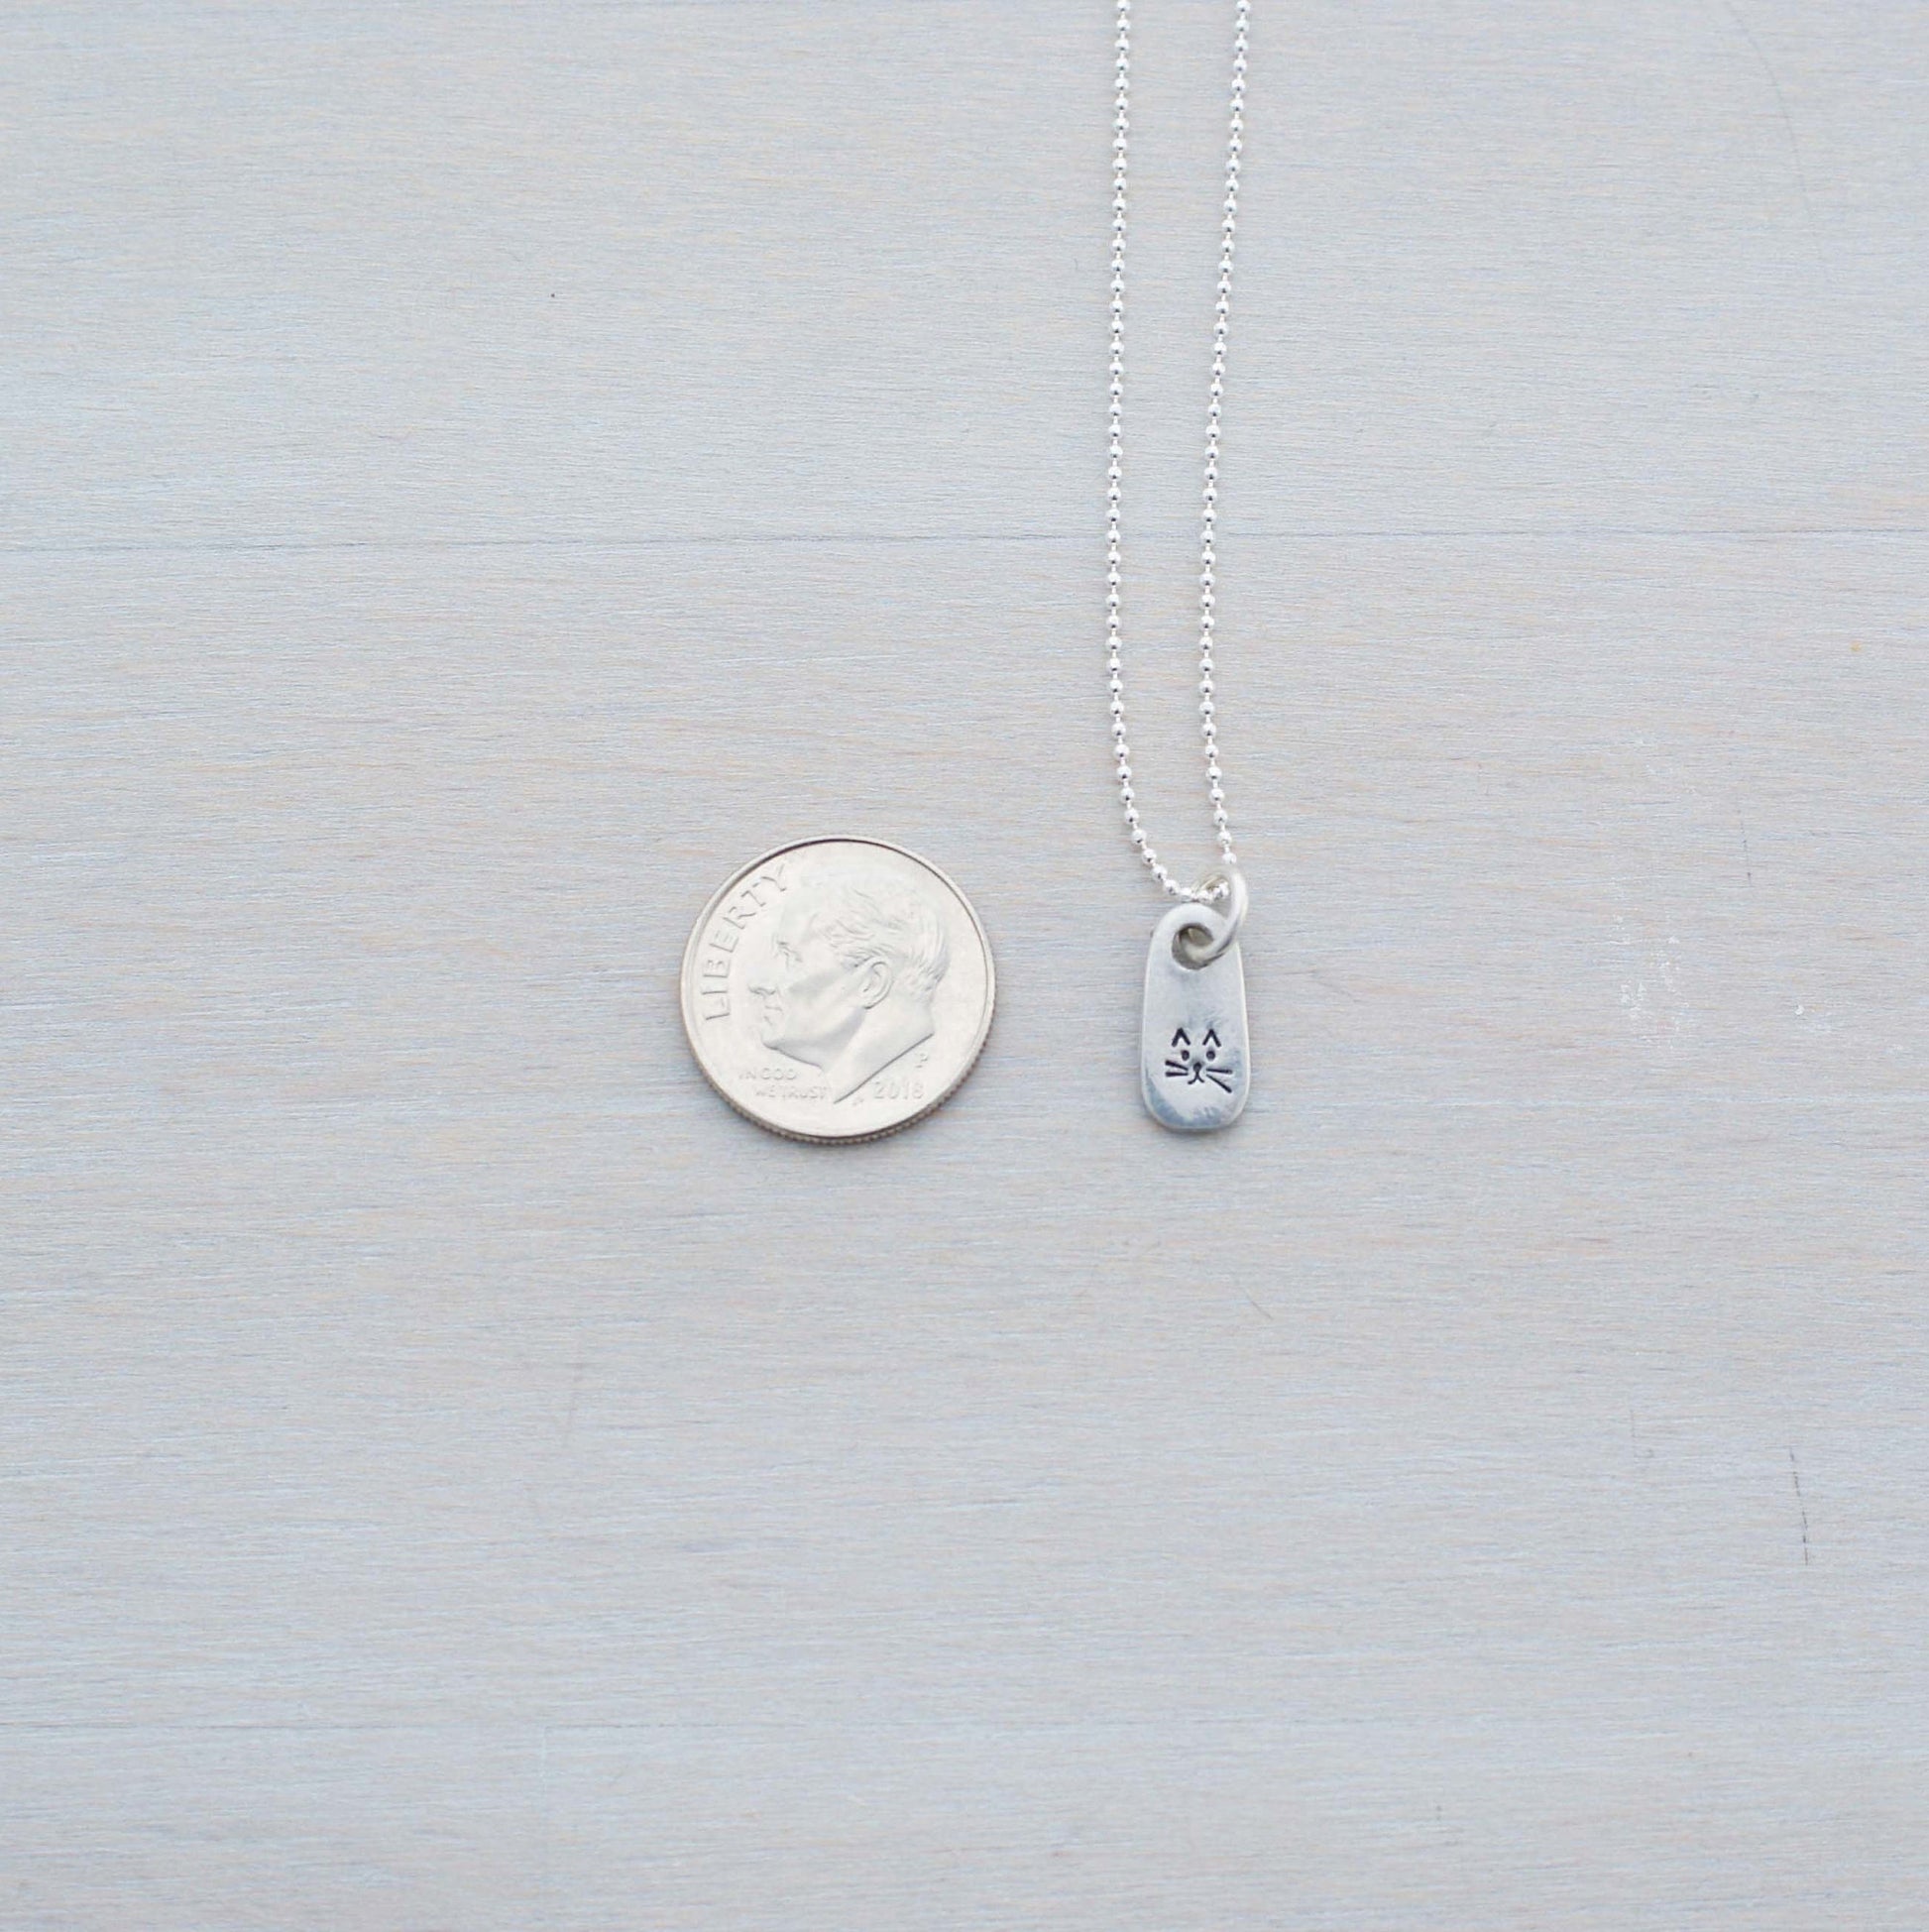 Petite Silver Necklace in Artisan Pewter with handstamped kitty face next to dim